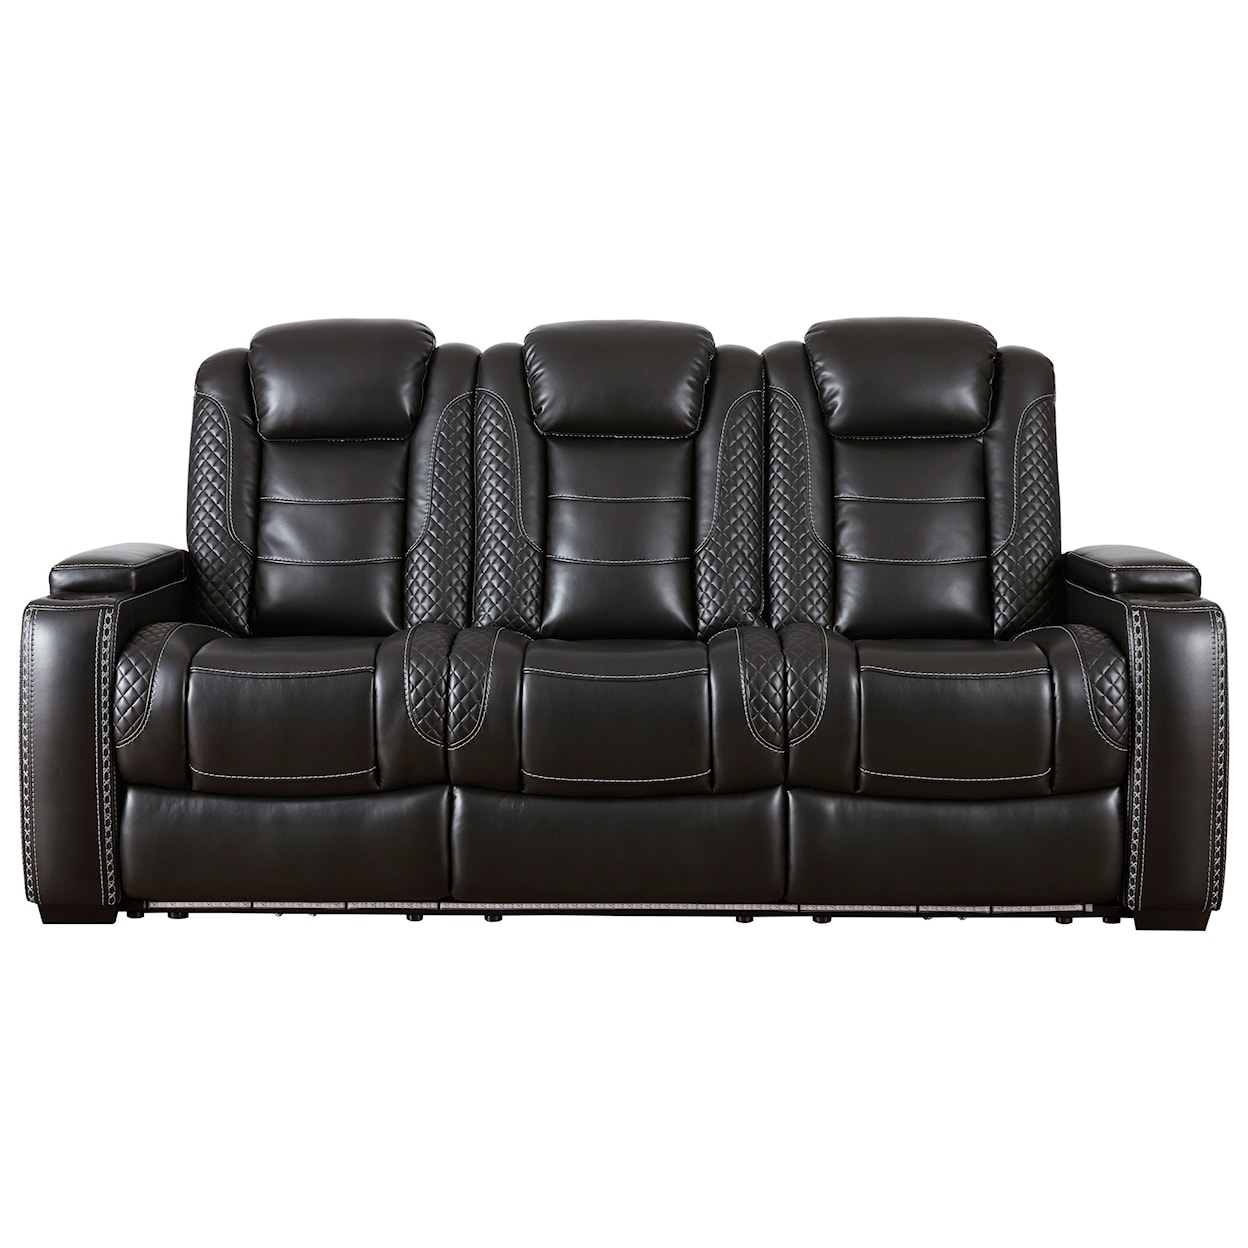 Michael Alan Select Party Time Power Reclining Sofa w/ Adjustable Headrests